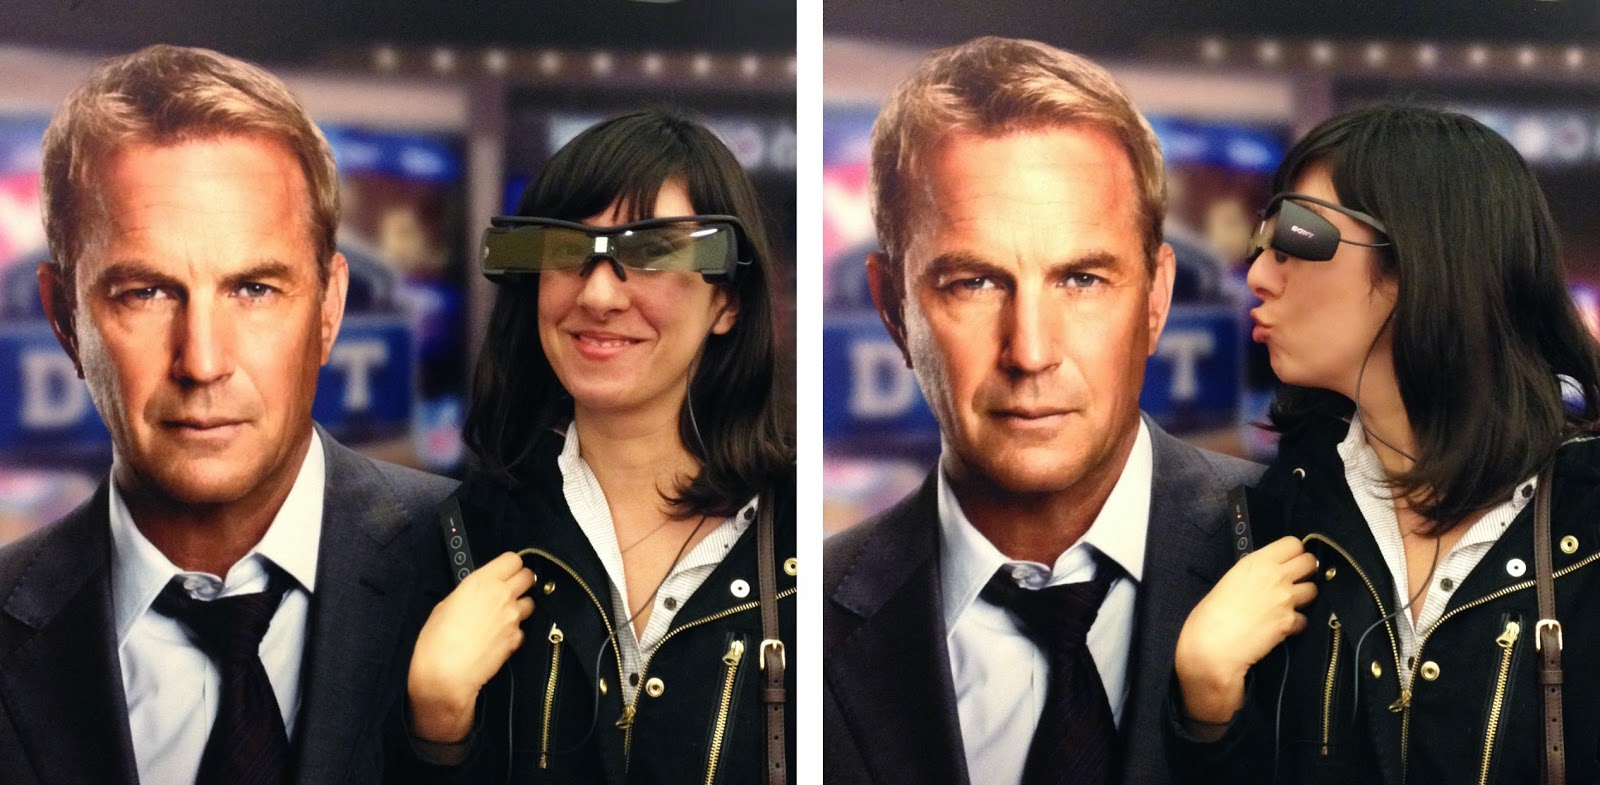 My Date with Captain America (and Kevin Costner) in Closed Captioning Glasses